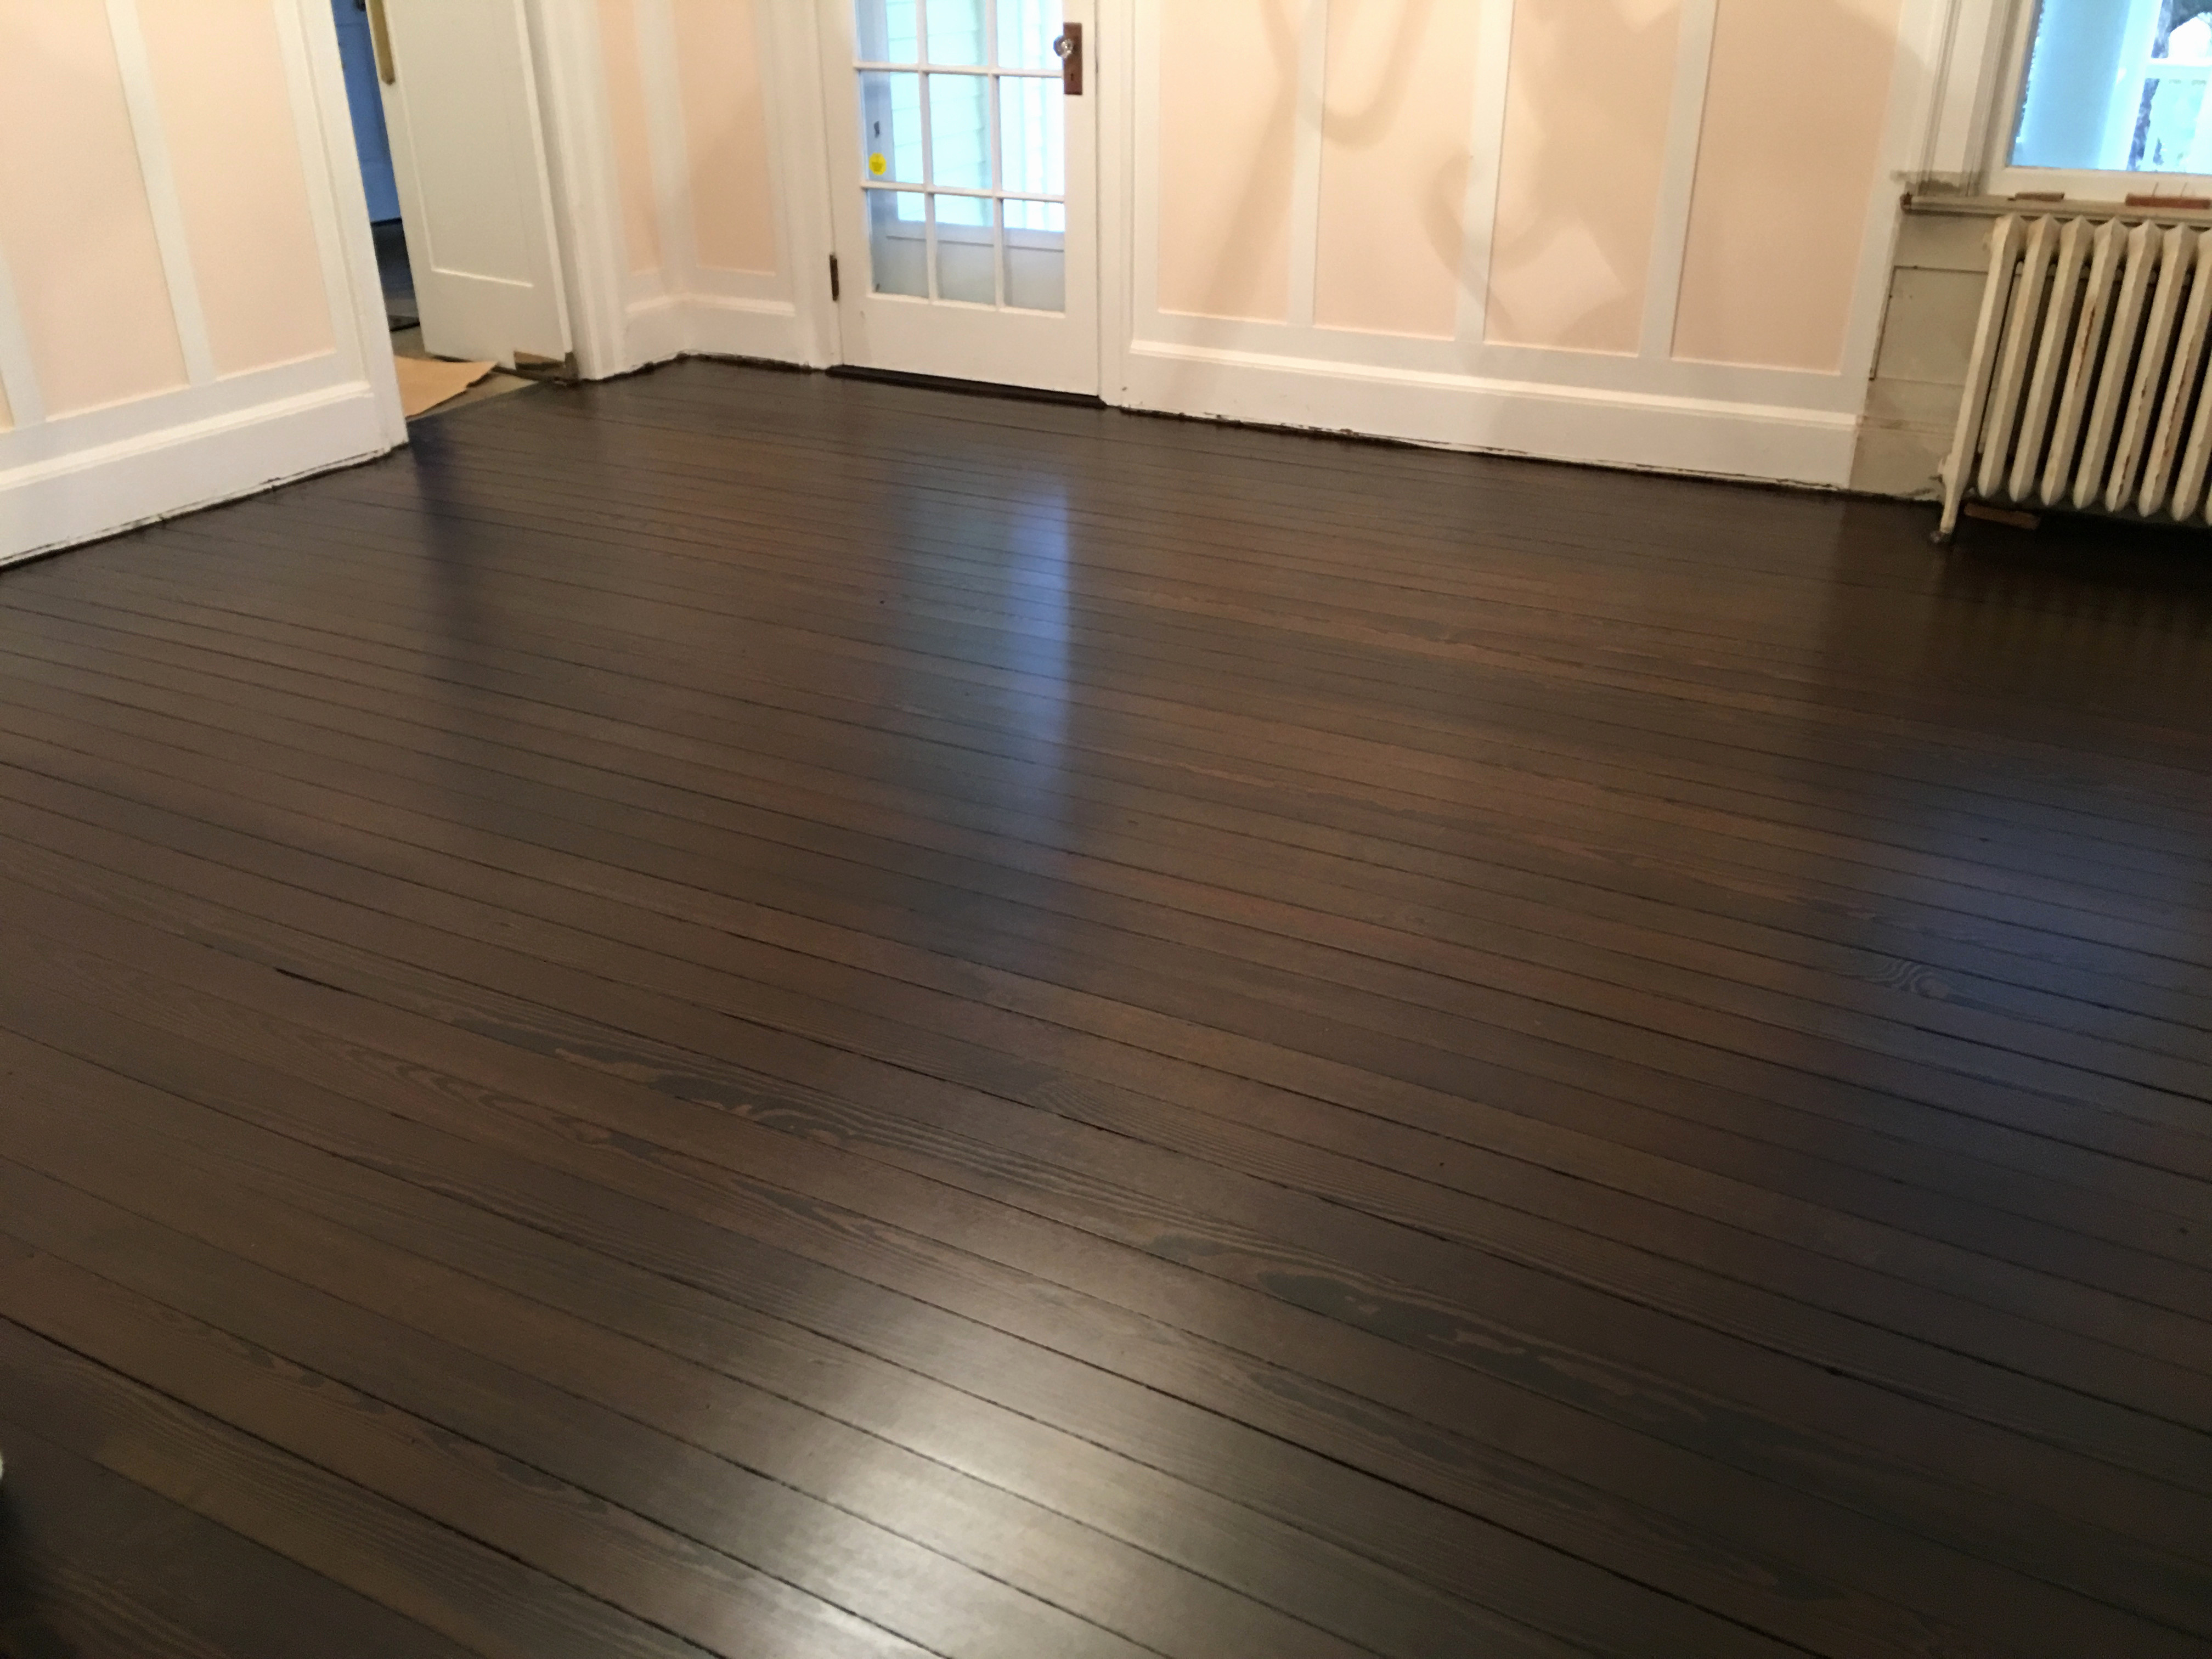 10 Amazing A Hardwood Floor Specialist 2024 free download a hardwood floor specialist of hardwoodfloor low voc canada archives wlcu intended for hardwood floor color trends 2017 elegant wood floor color trends cheap laminate wood flooring hardwood 